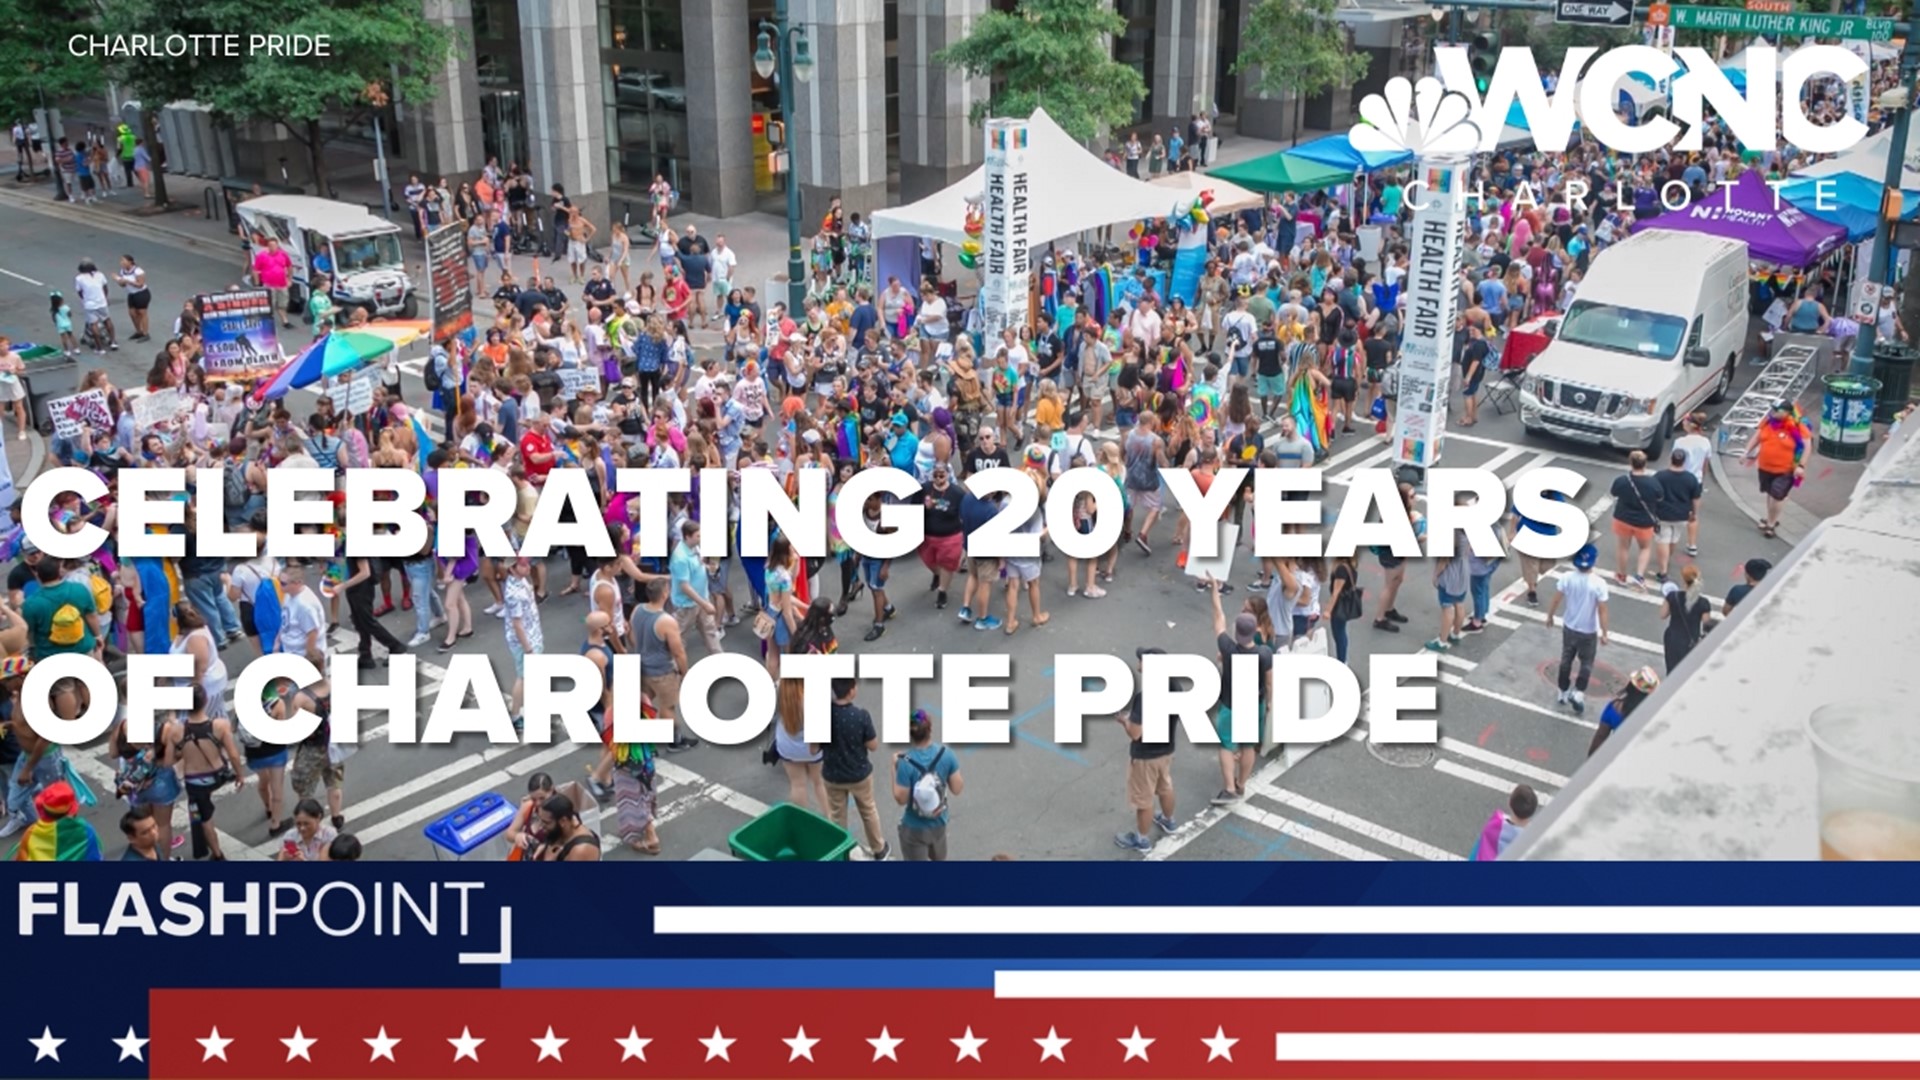 On Flashpoint, the President of Charlotte Pride explains how the celebration remains more relevant than ever.